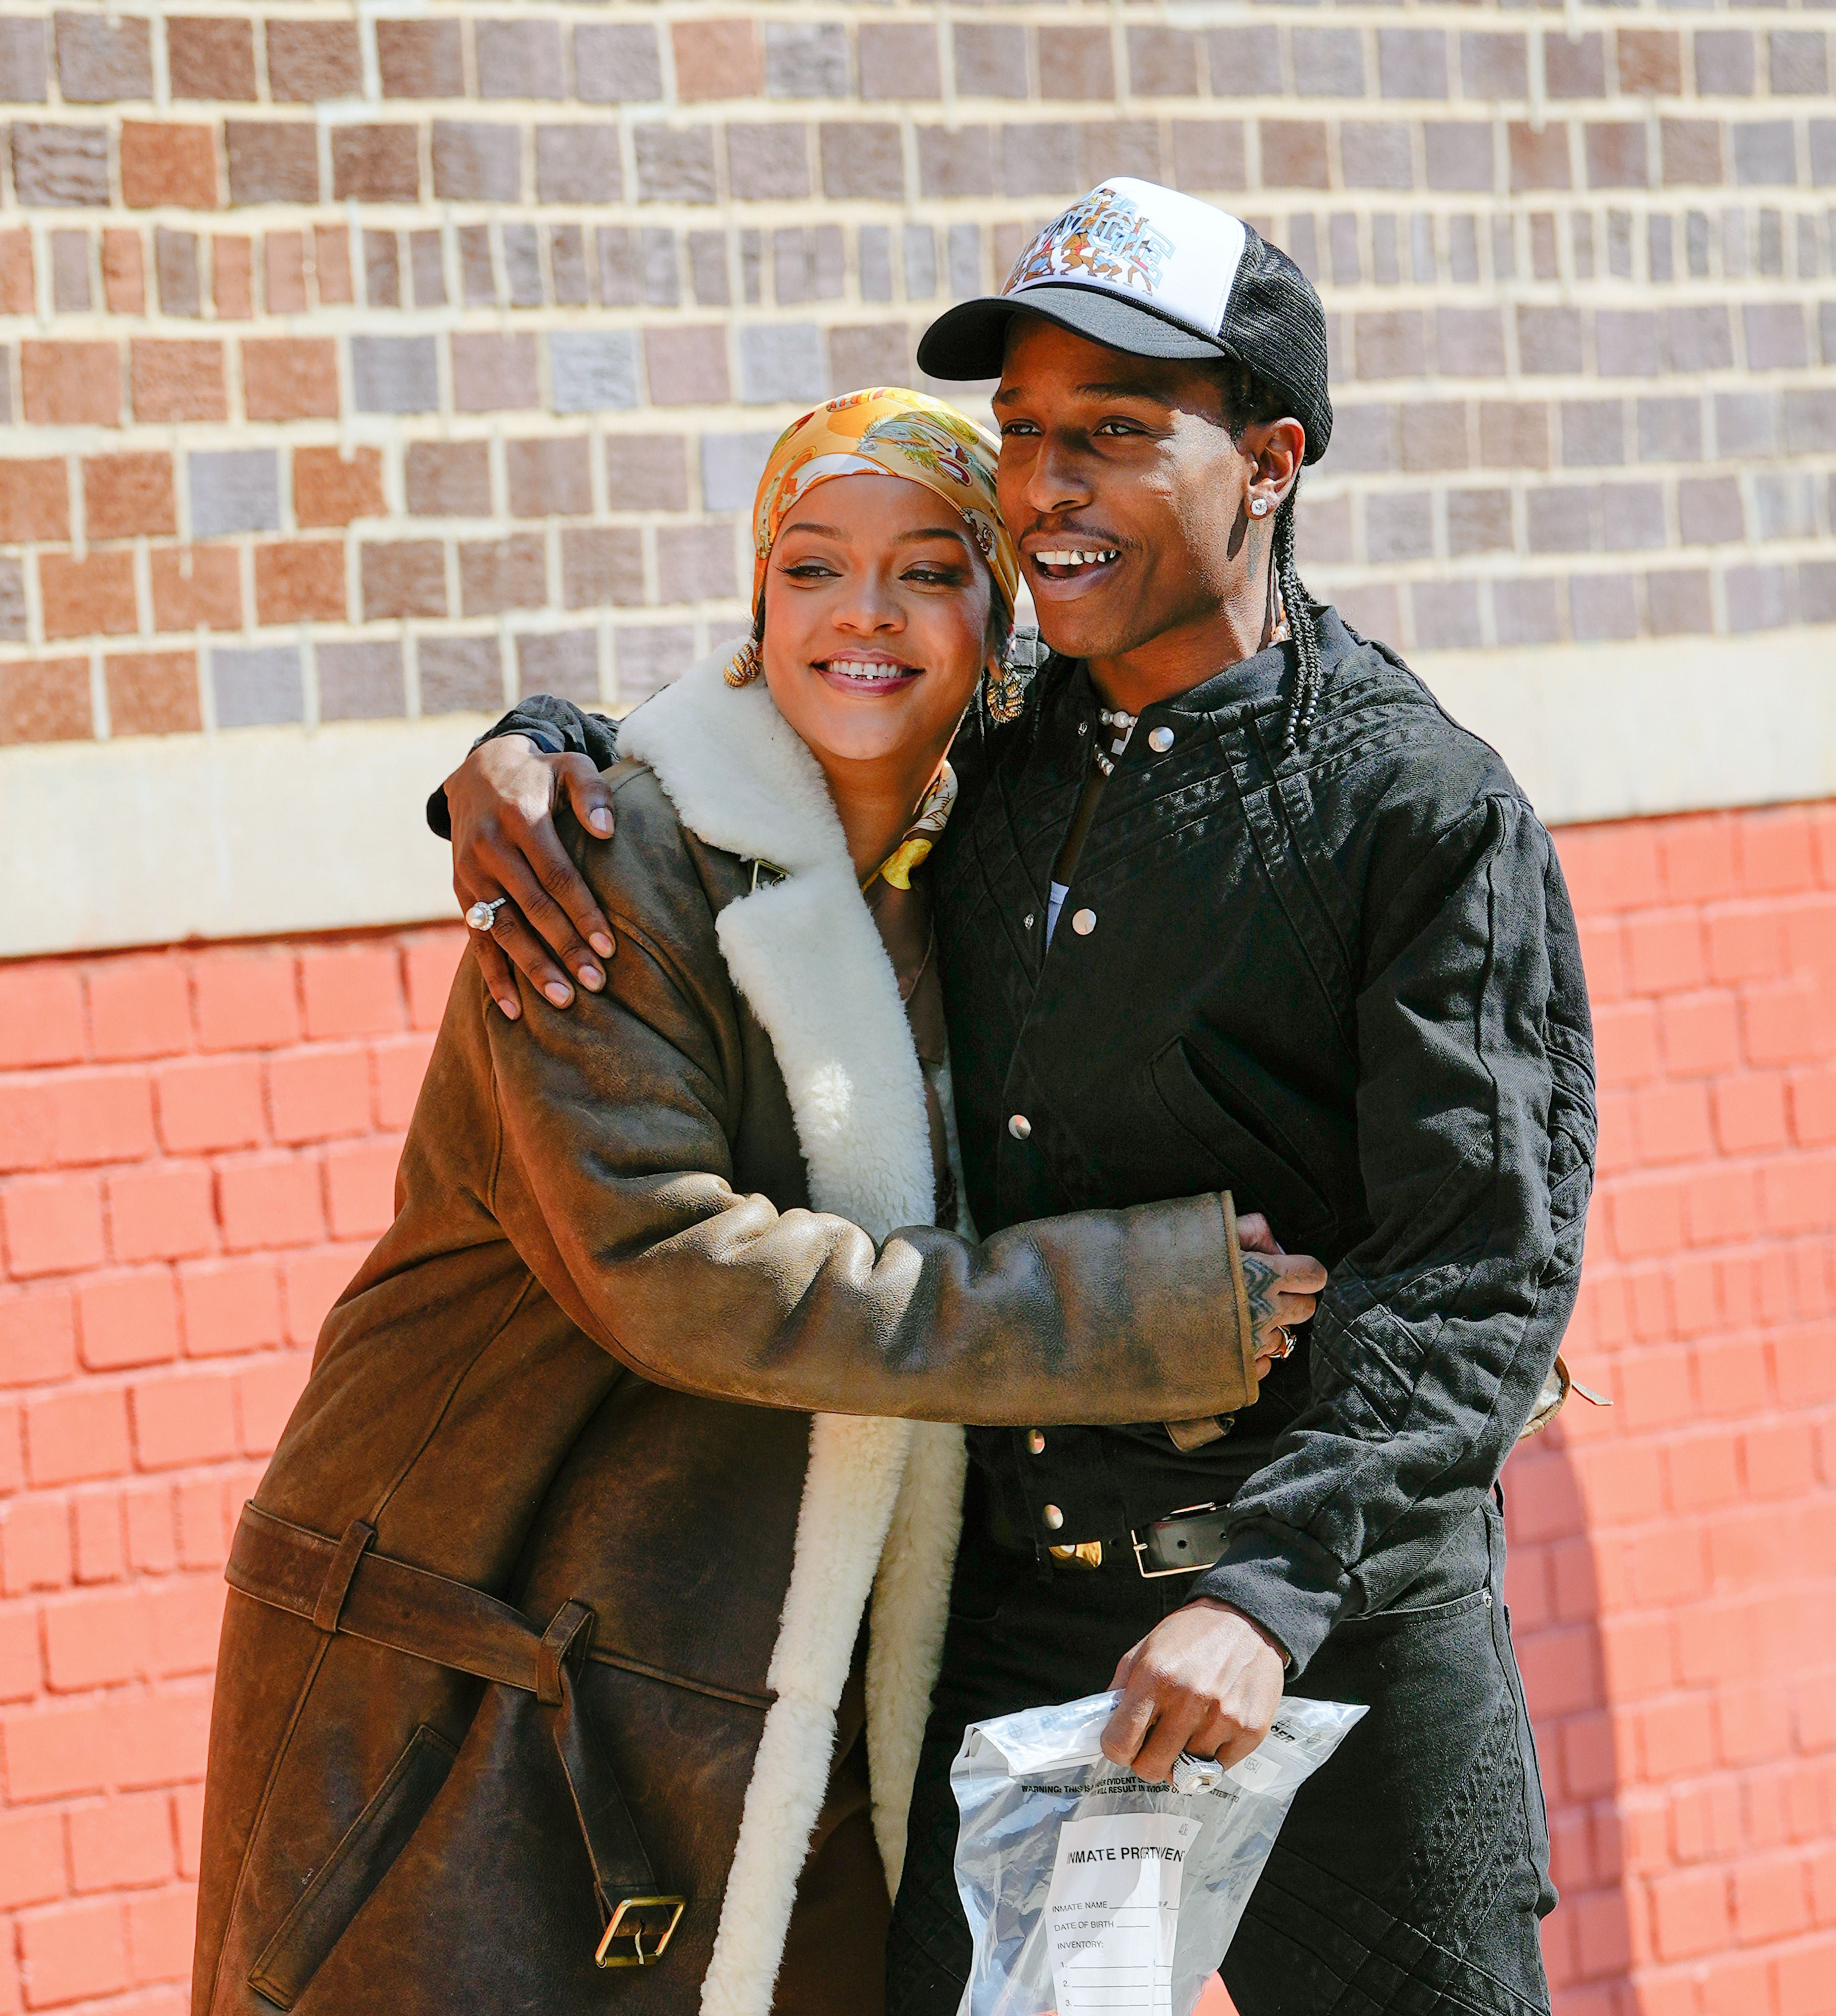 Rihanna and ASAP Rocky: Do either of the expecting parents already